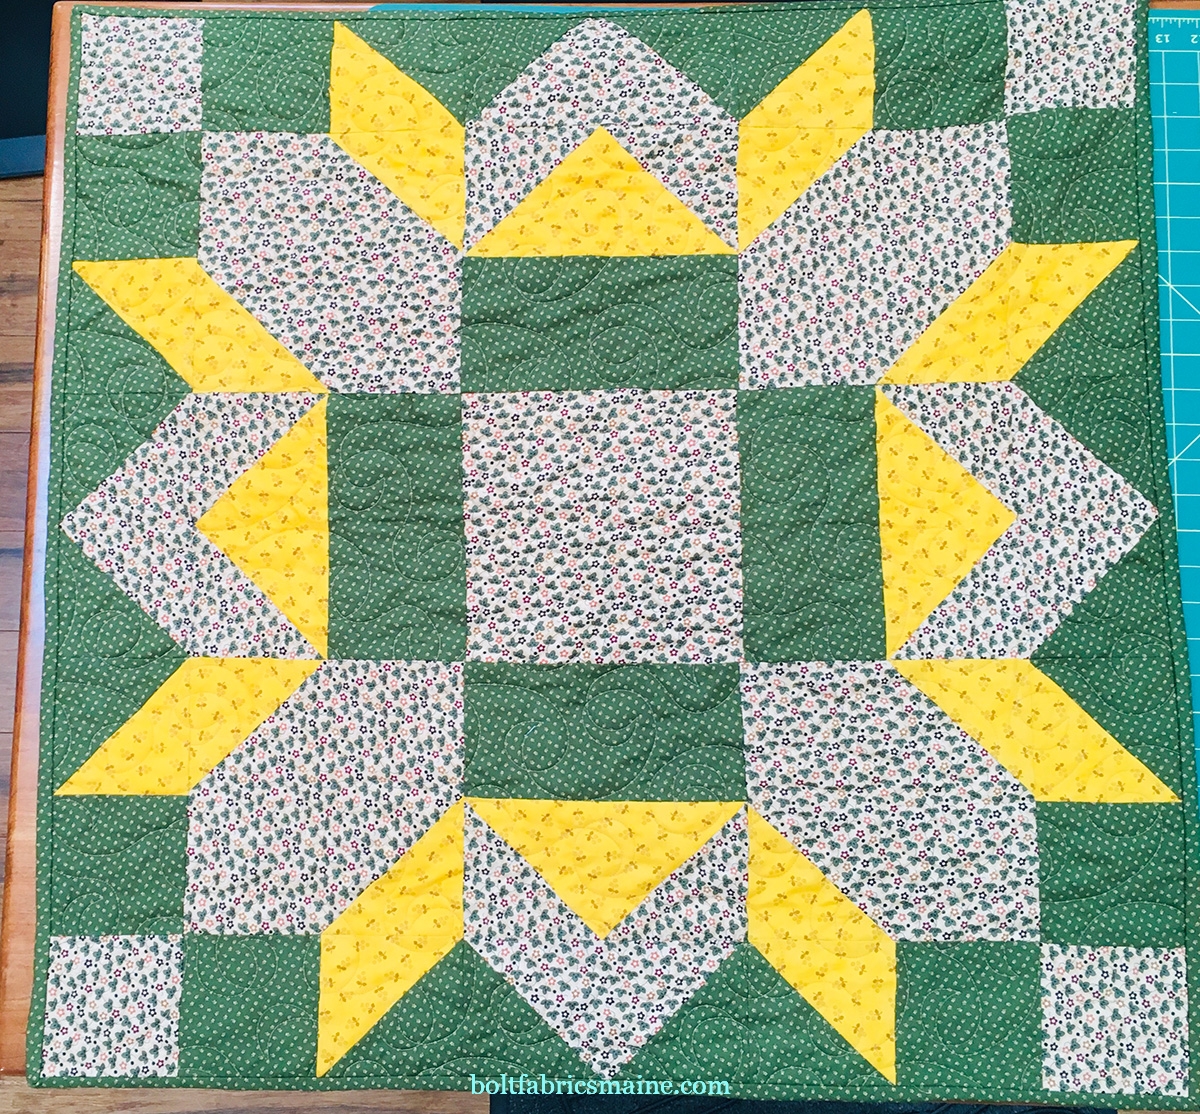 25+PATTERNS  FREE MOTION QUILTING